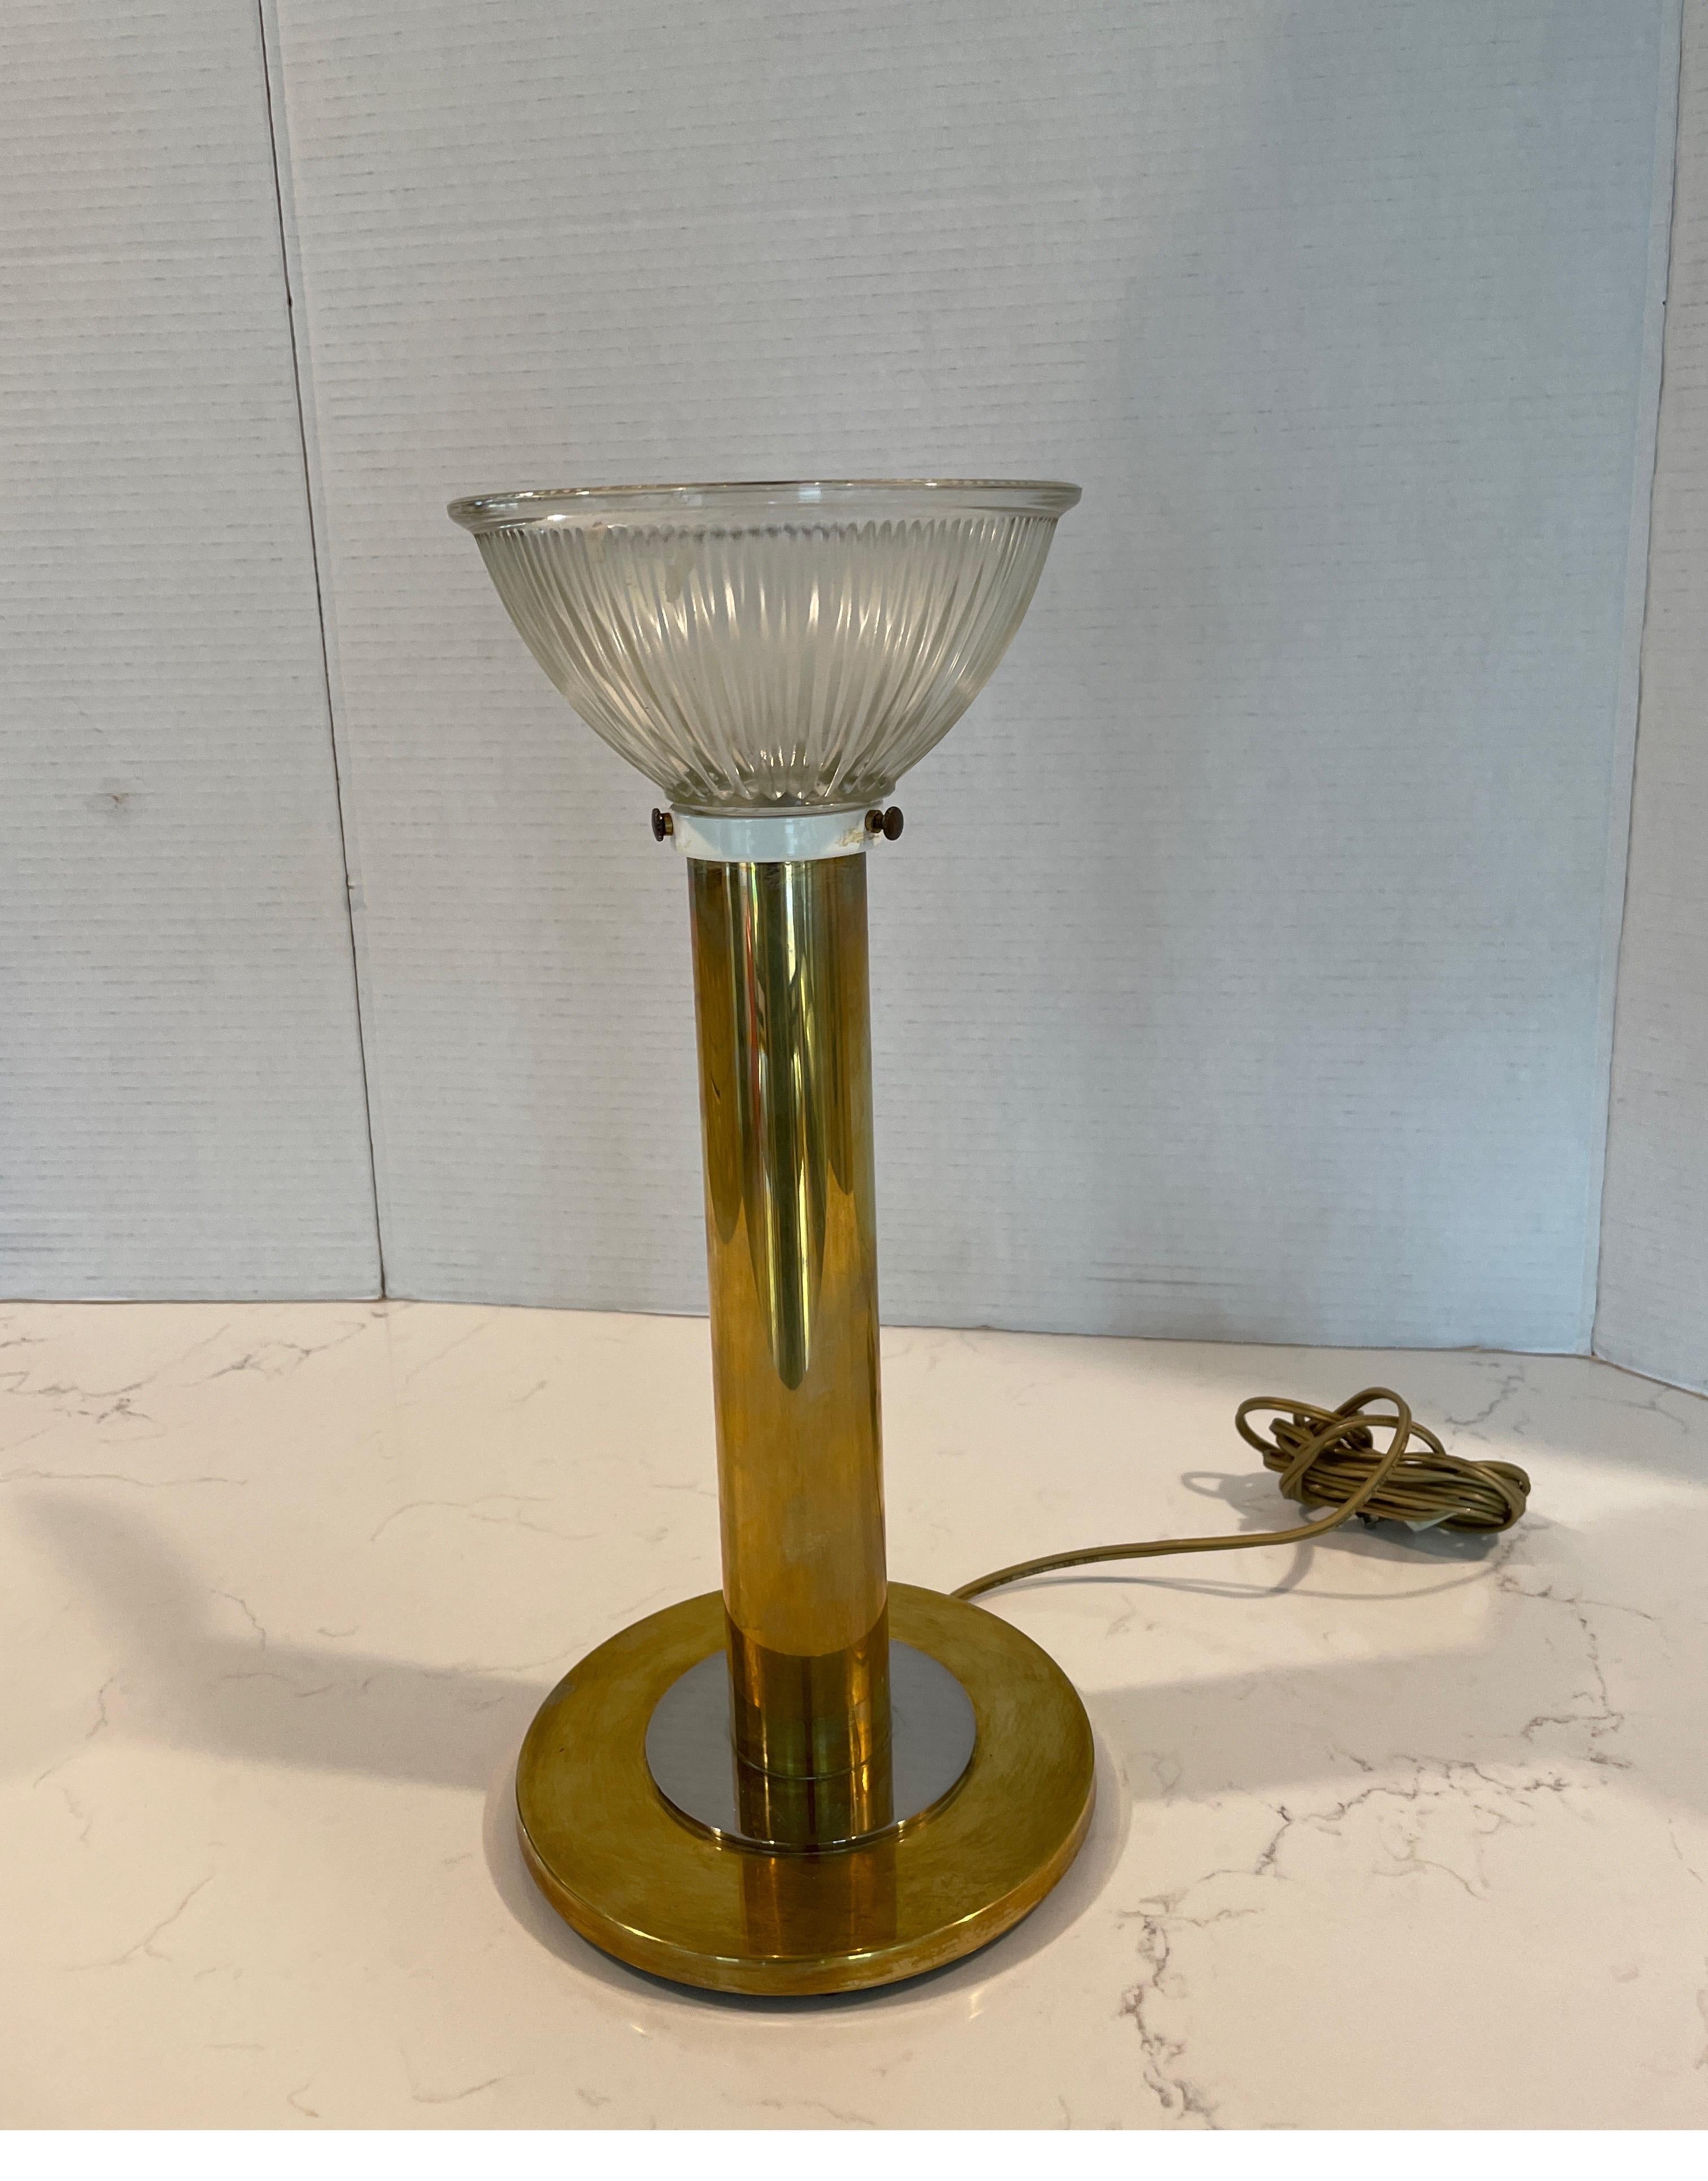 Nessen Brass and Chrome Desk Lamp In Good Condition For Sale In Chicago, IL